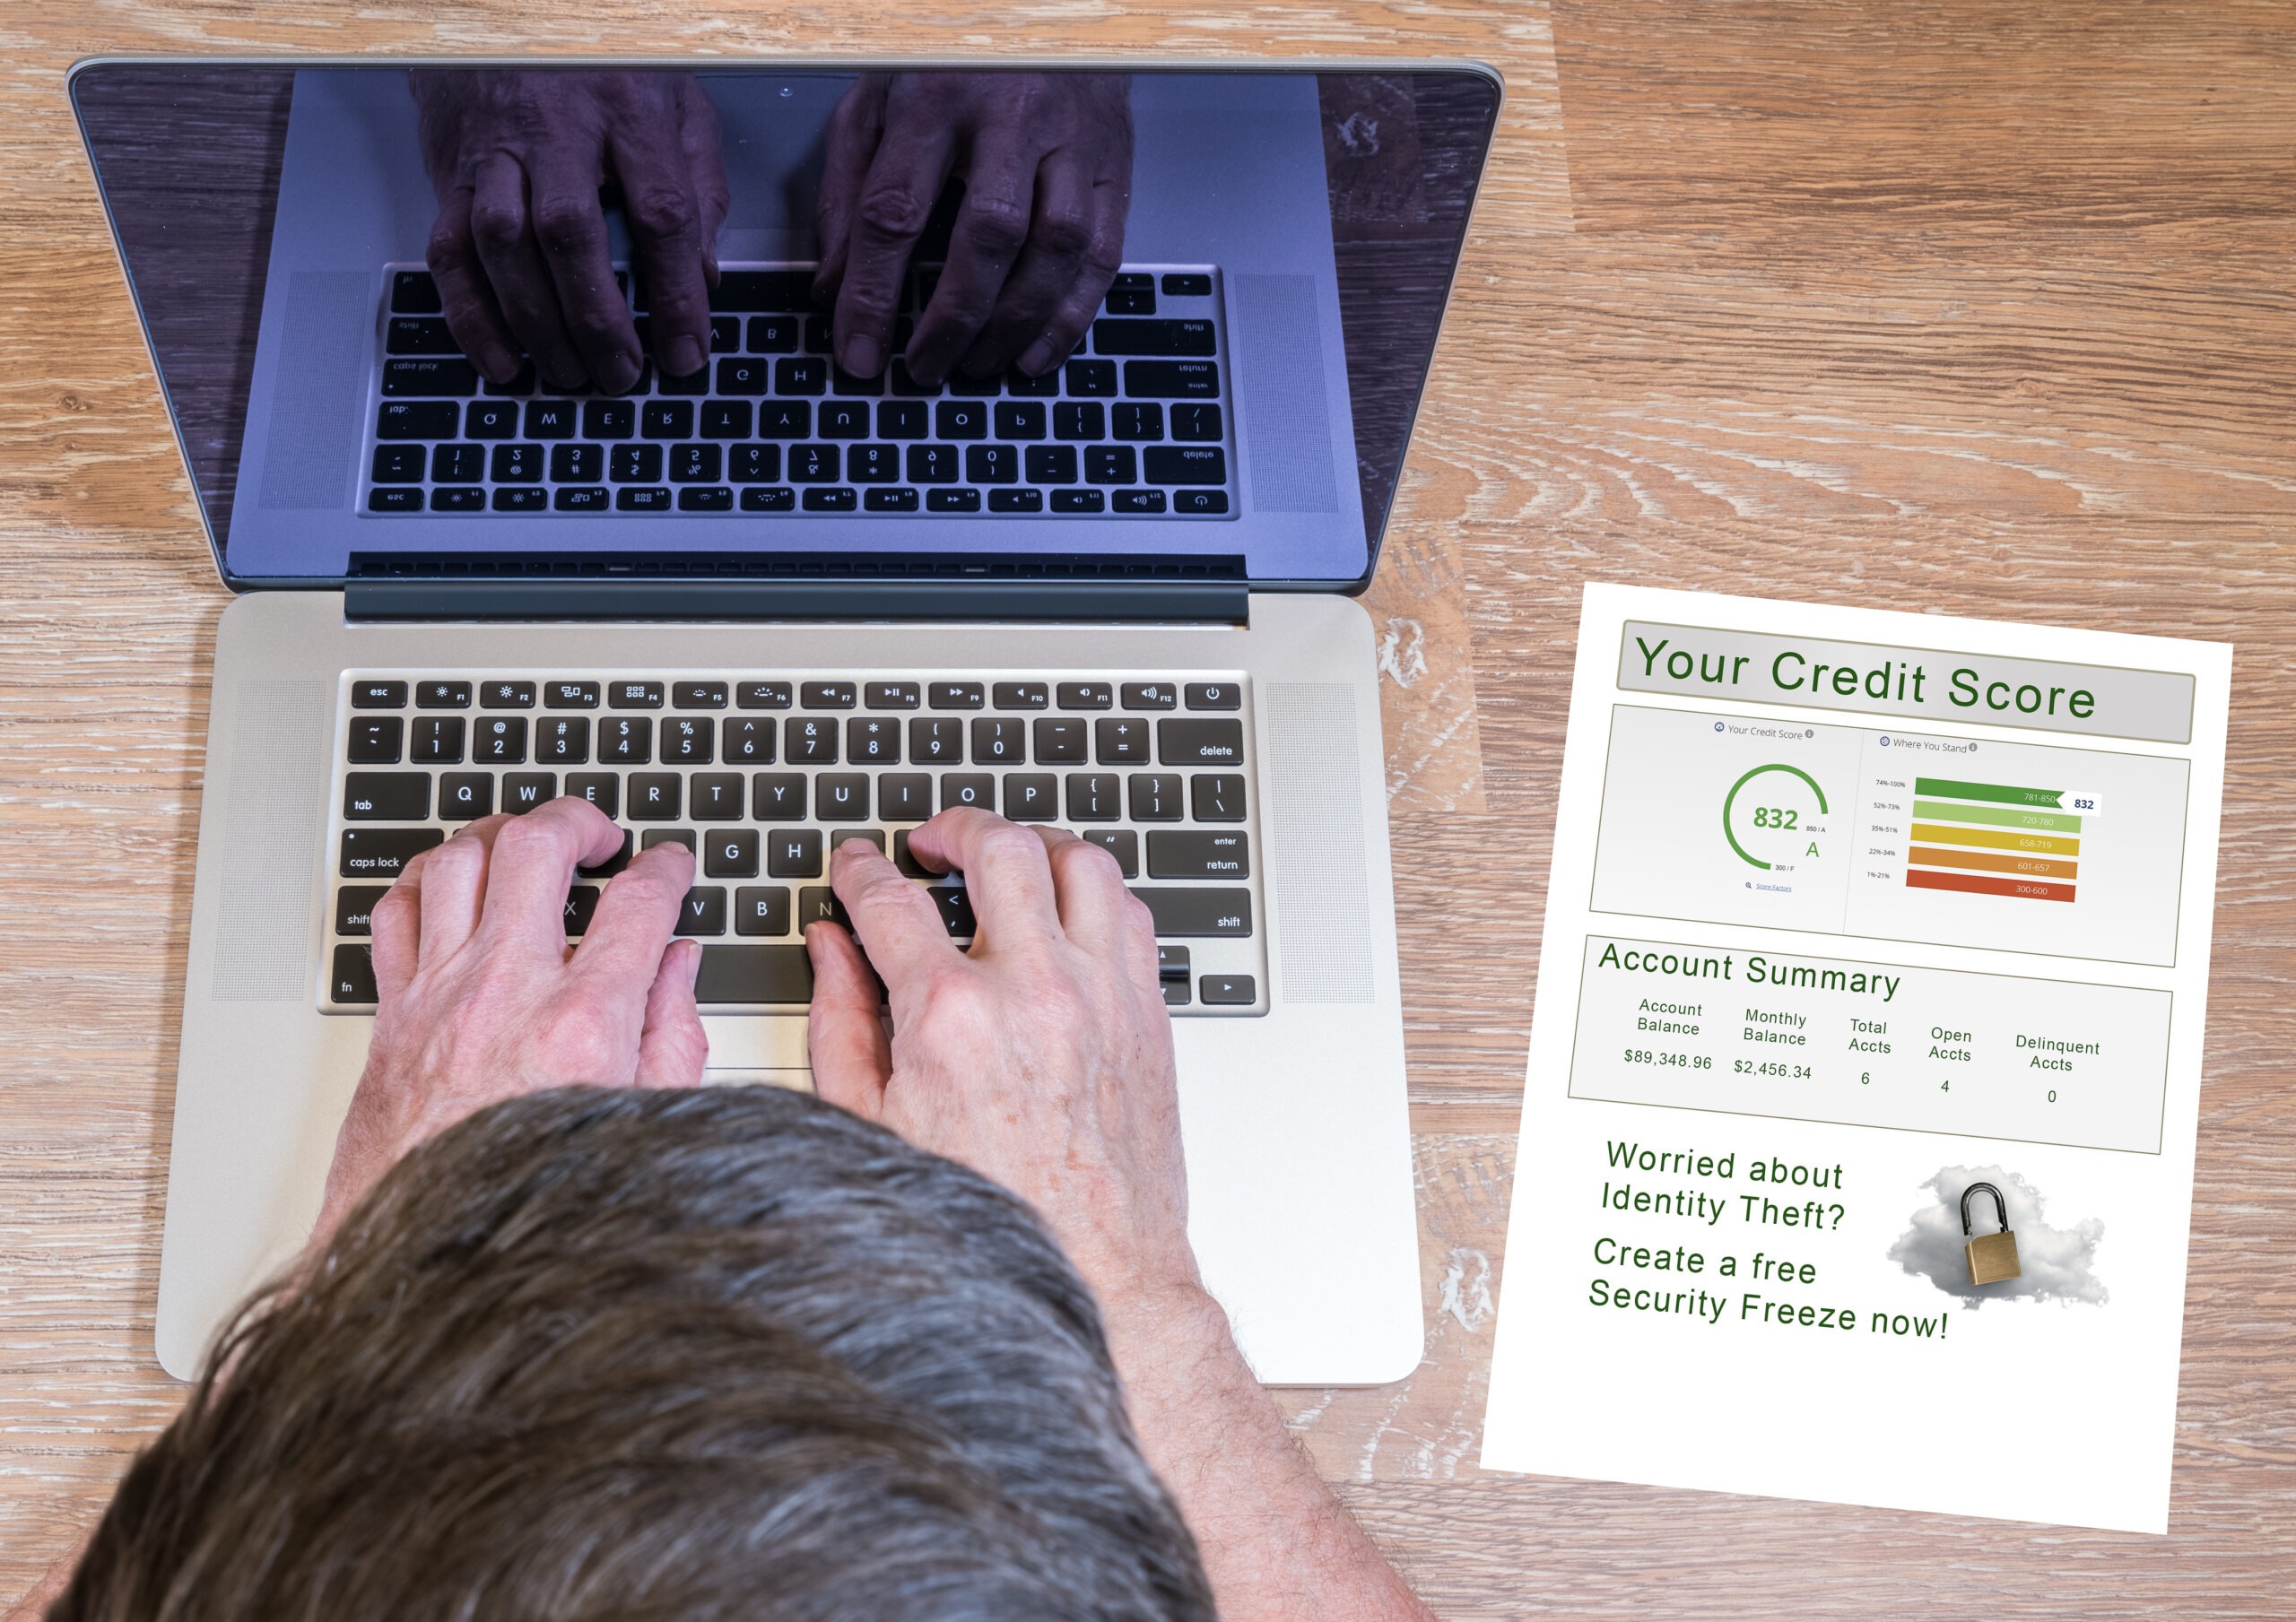 10 Bad Habits Or Decisions That Can Decrease Your Credit Score